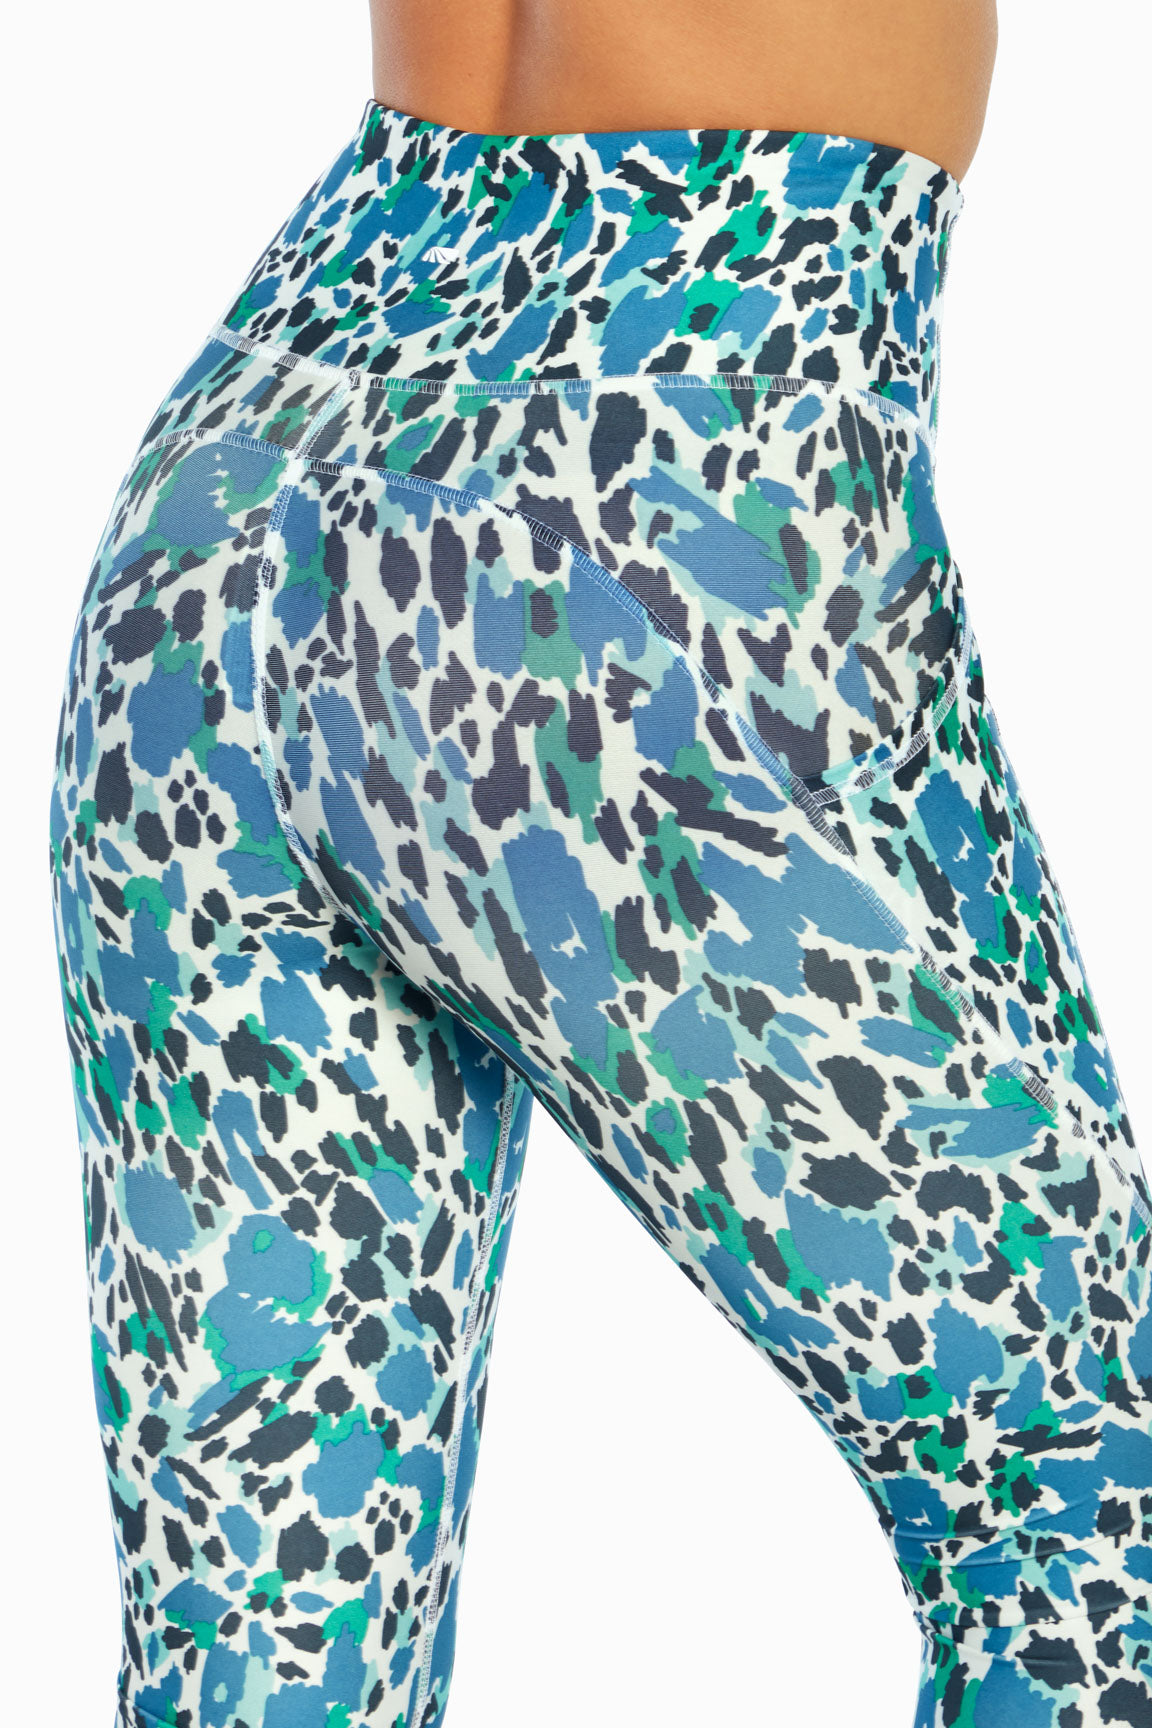 Pocket Sport - Marine at sea 💙🌊 @[1784140036870Claude Legging - Marinea] Claude  Legging - Marine #marine #colourful leggings #activewear #OutHereMoving